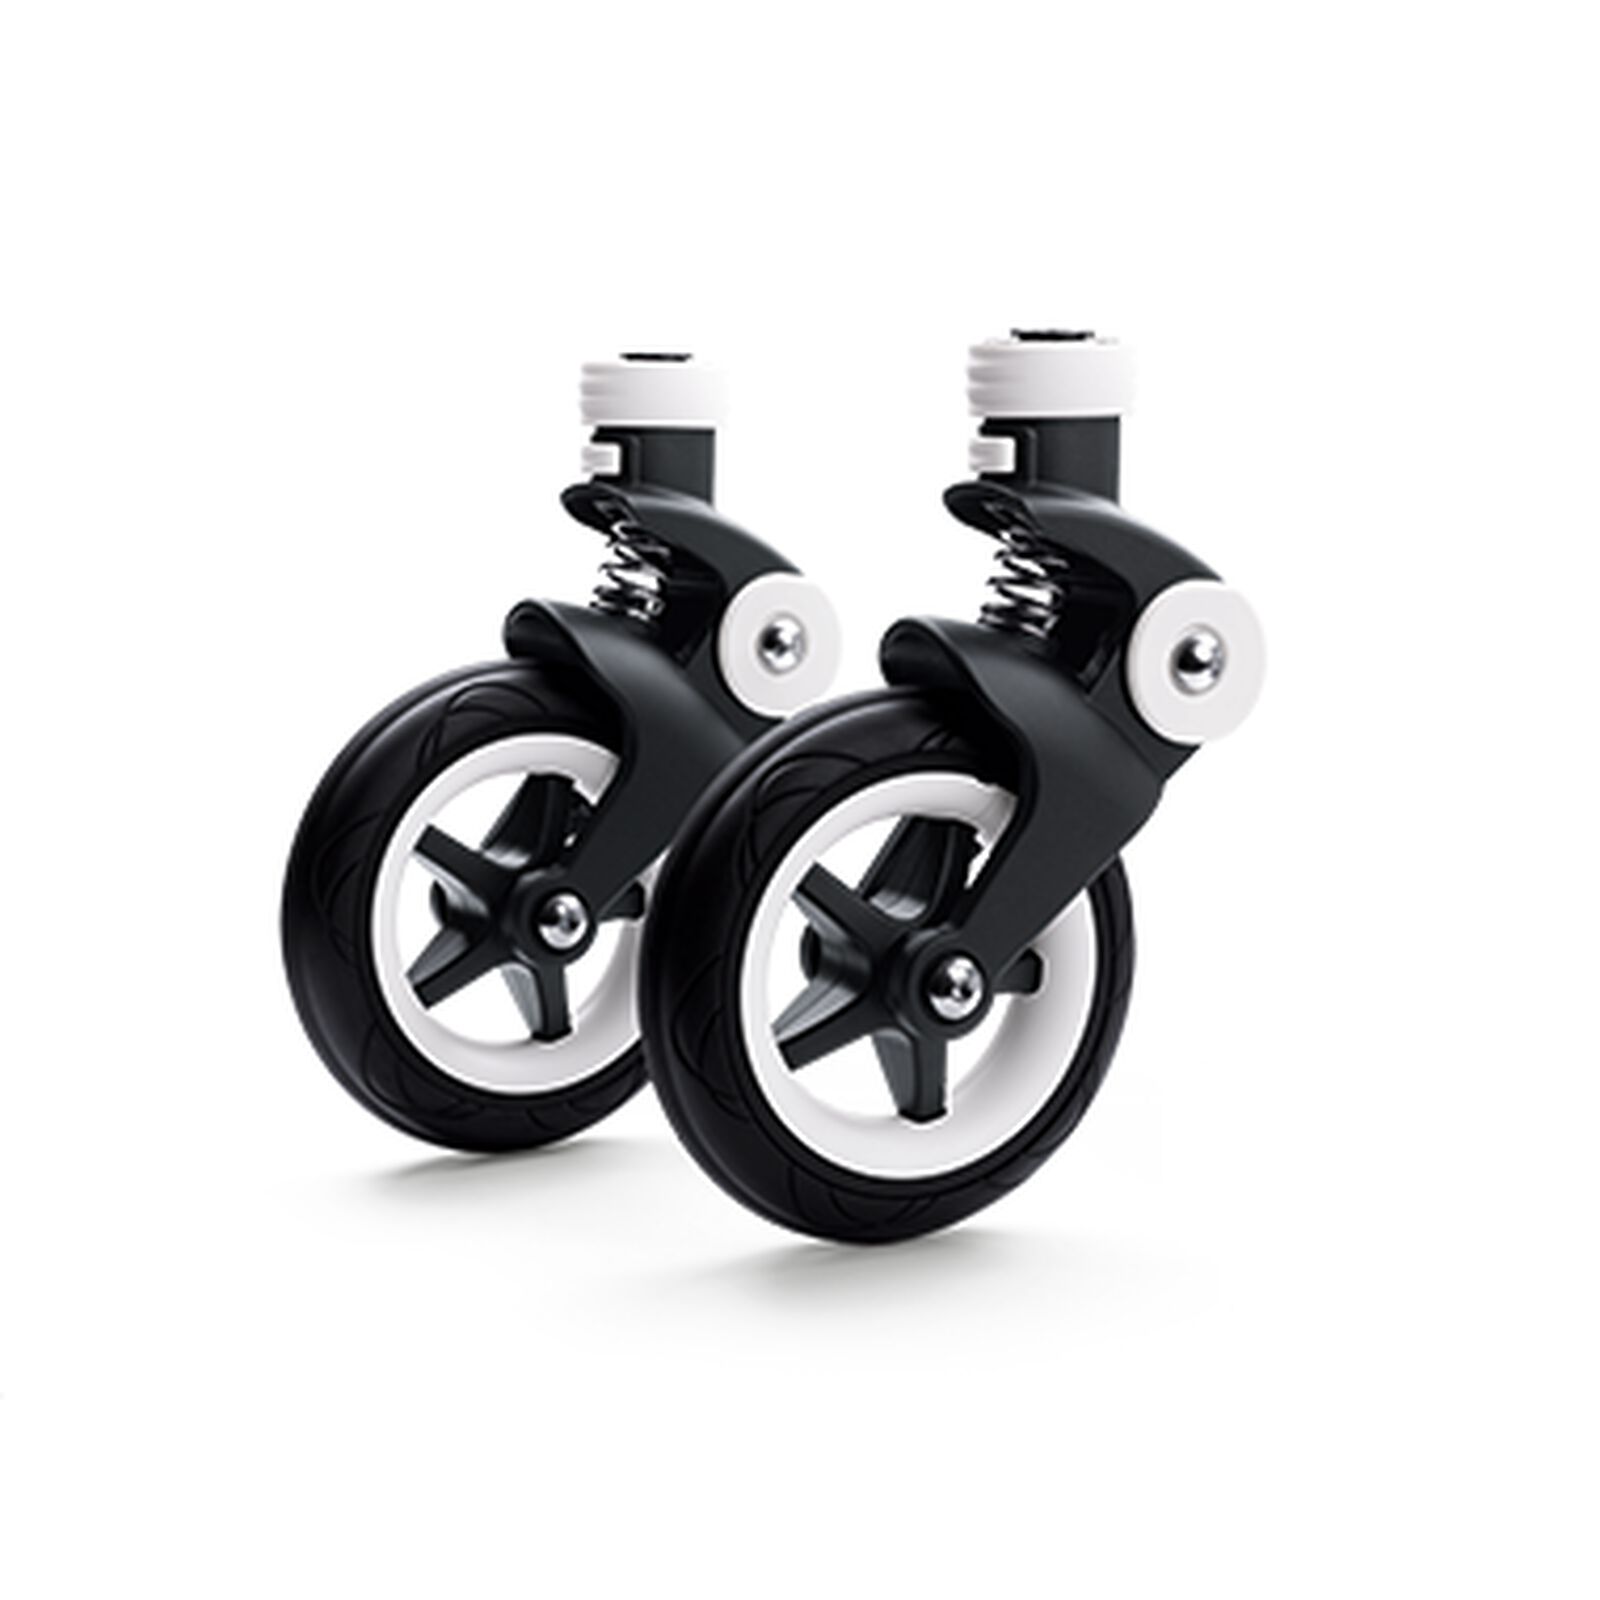 Bugaboo Bee 5 swivel wheels replacement set - View 1